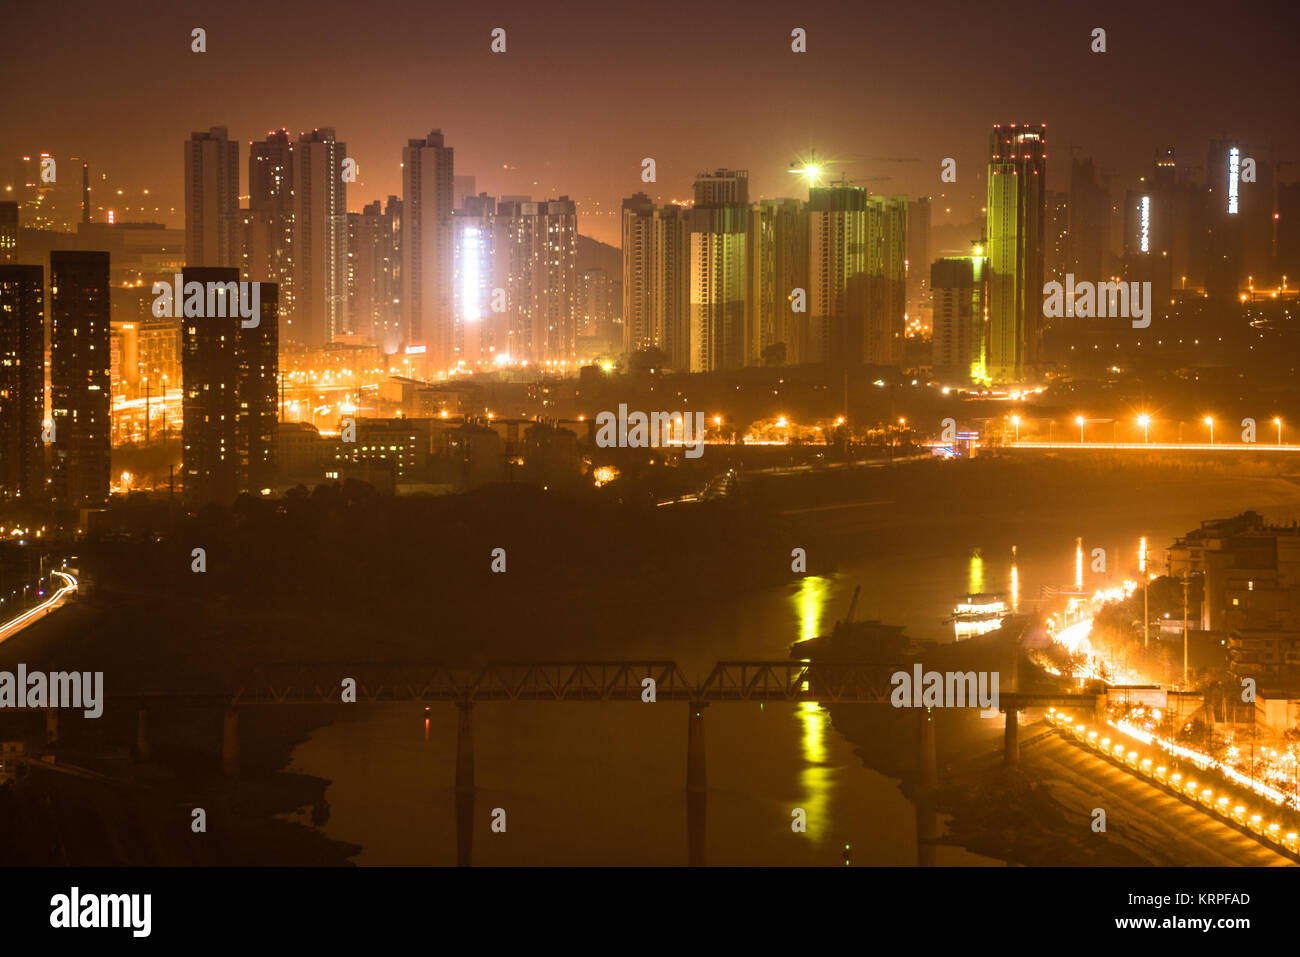 Aerial night view cityscape of Han river between Hankou and Hanyang districts in Wuhan central China Stock Photo